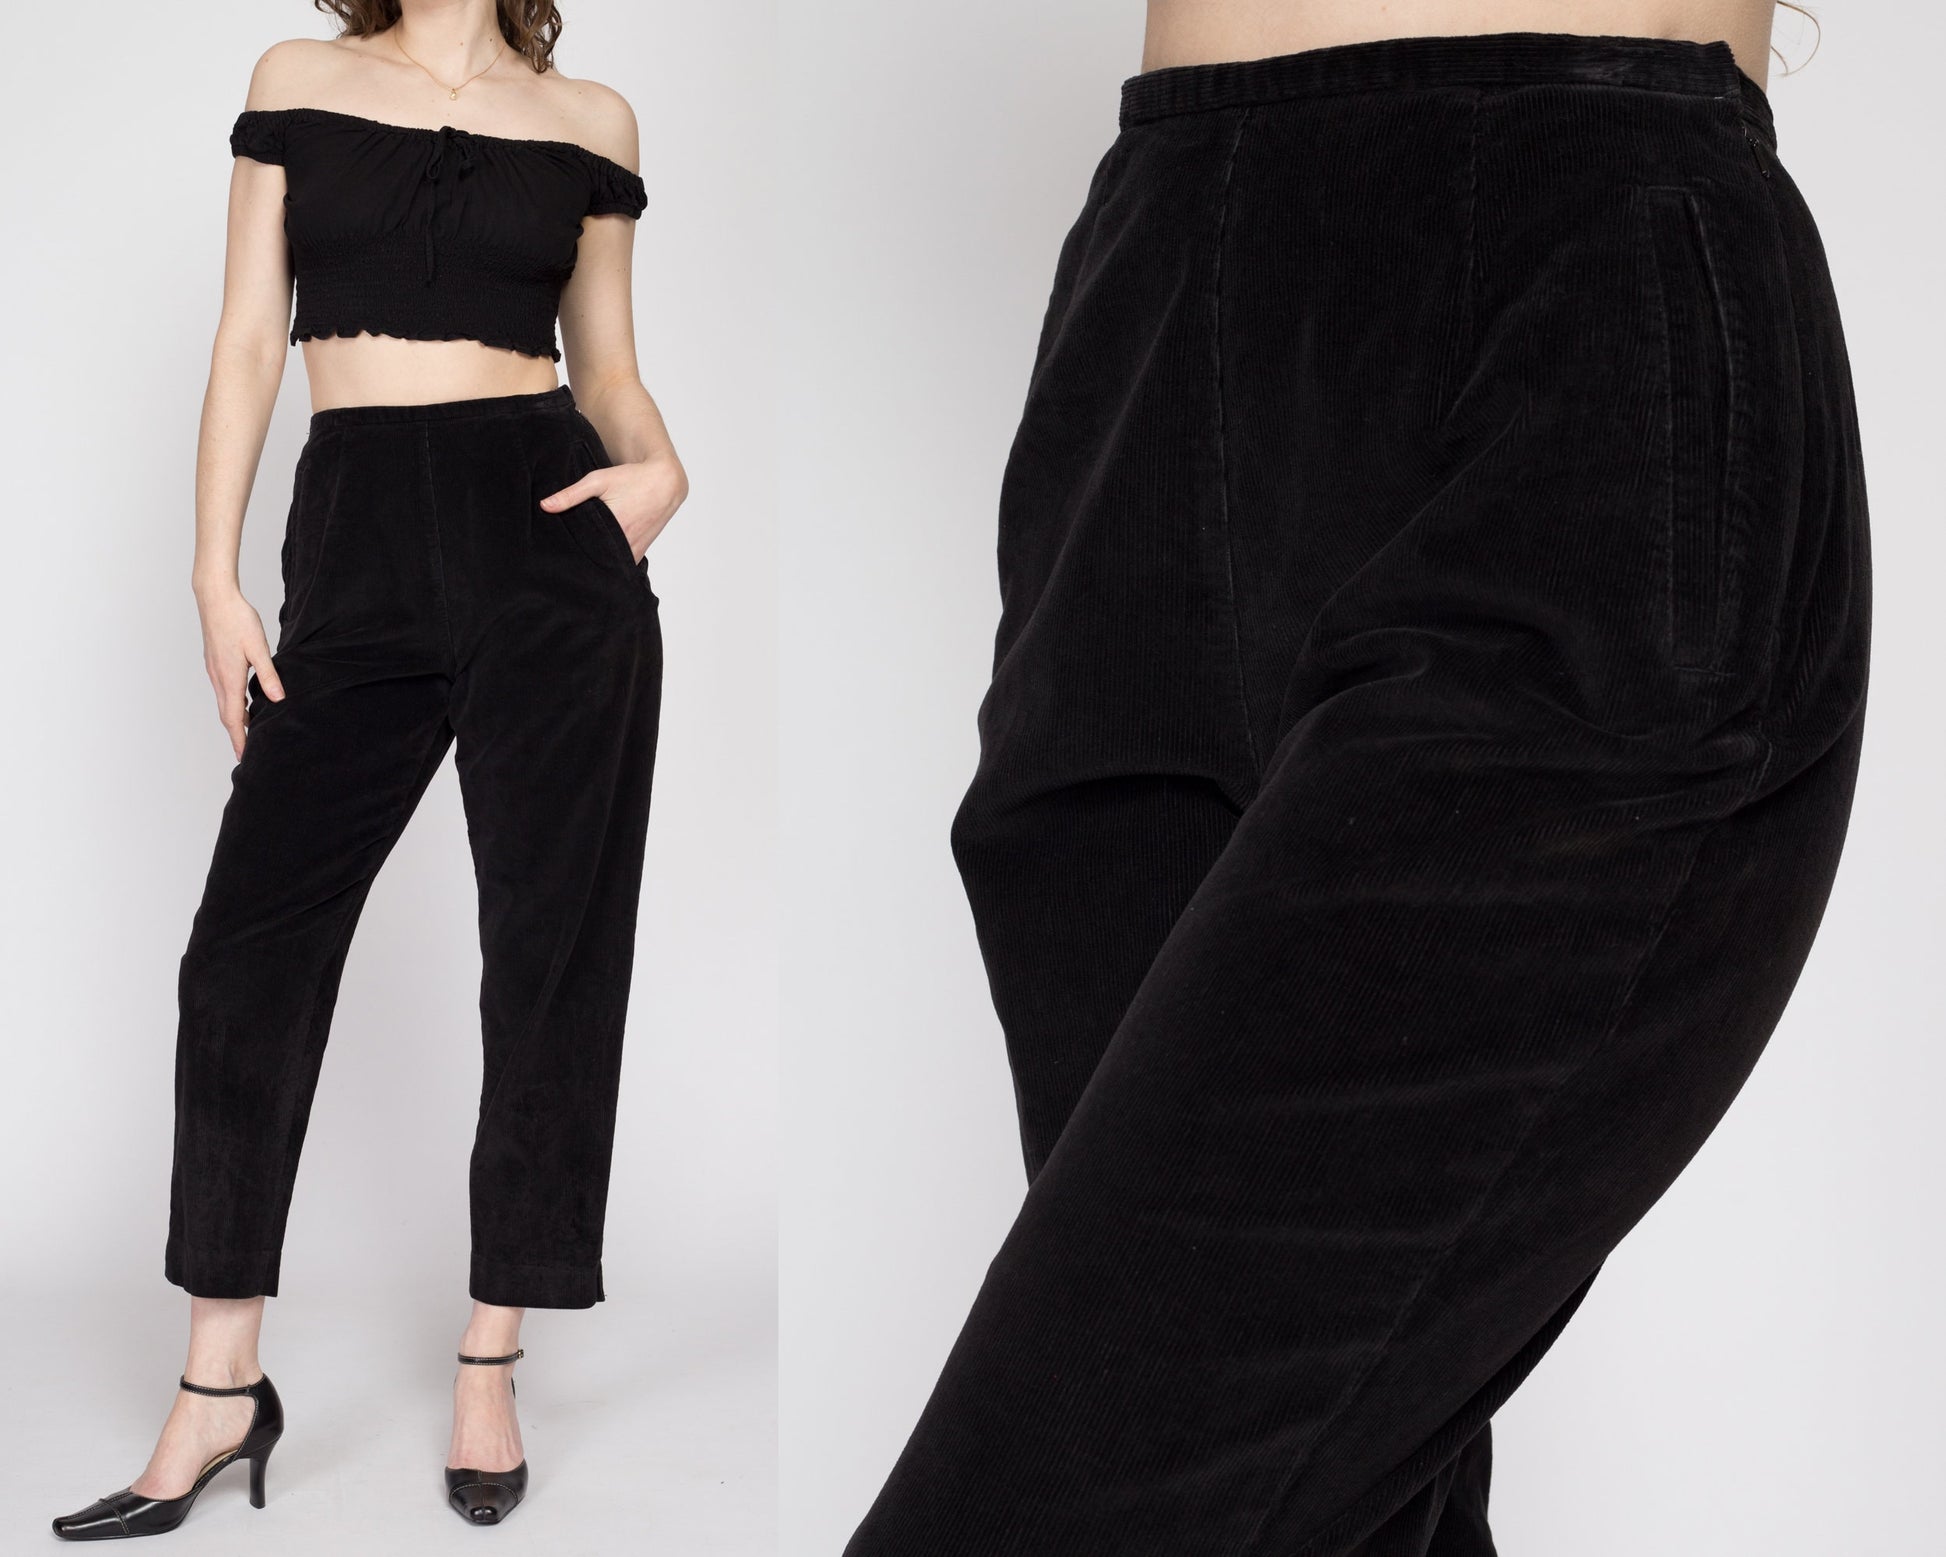 Petite High-Rise Tapered Cropped Pant